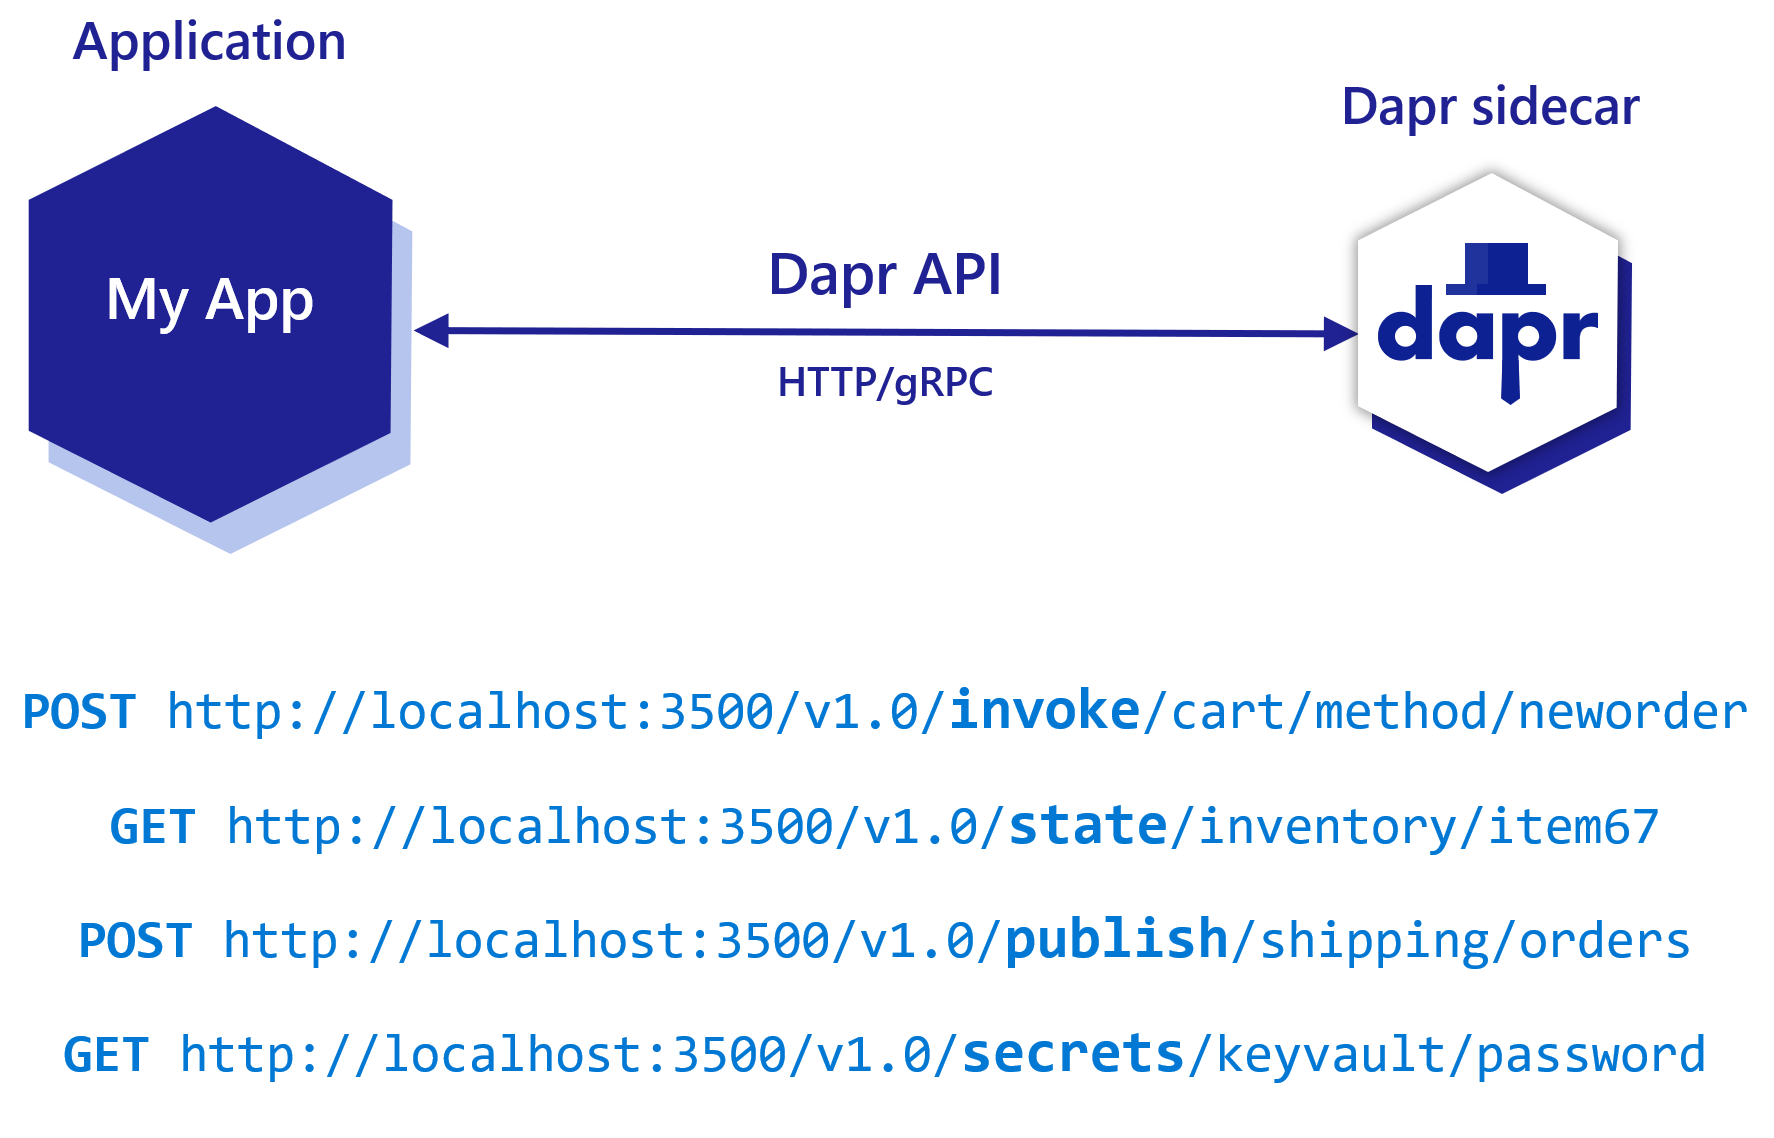 DAPR digram showing application and sidecar along with http endpoints